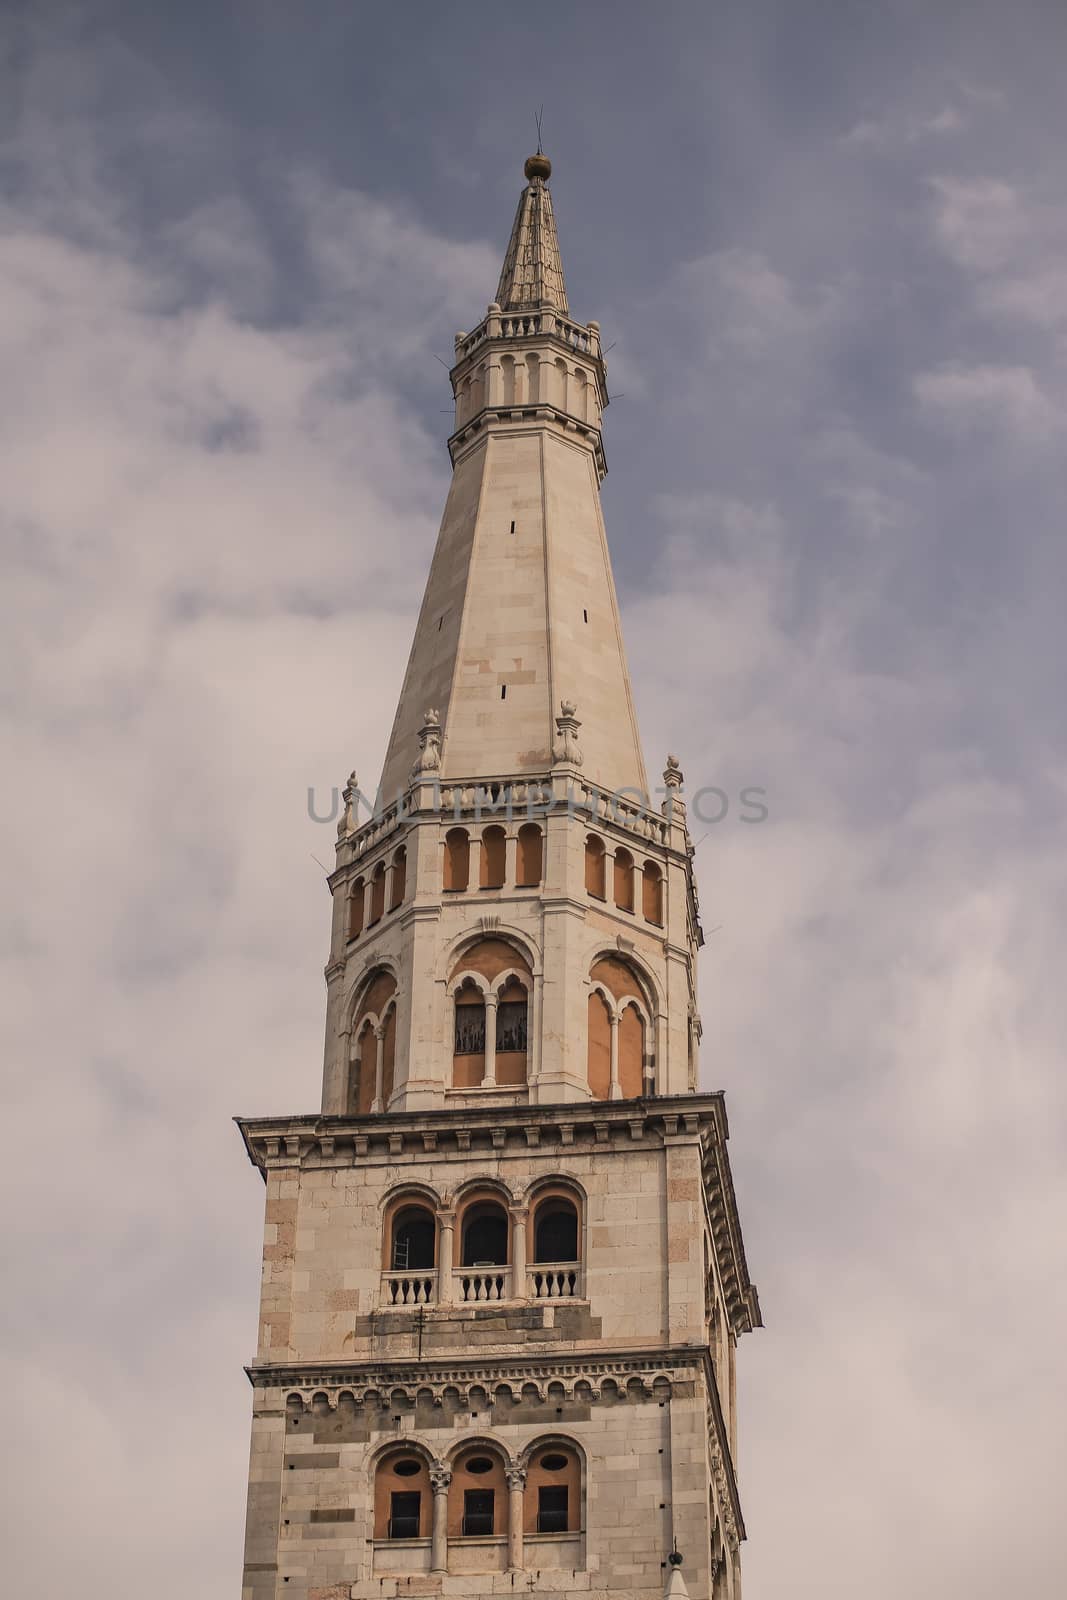 Ghirlandina ancient tower from below in Modena city, Italy